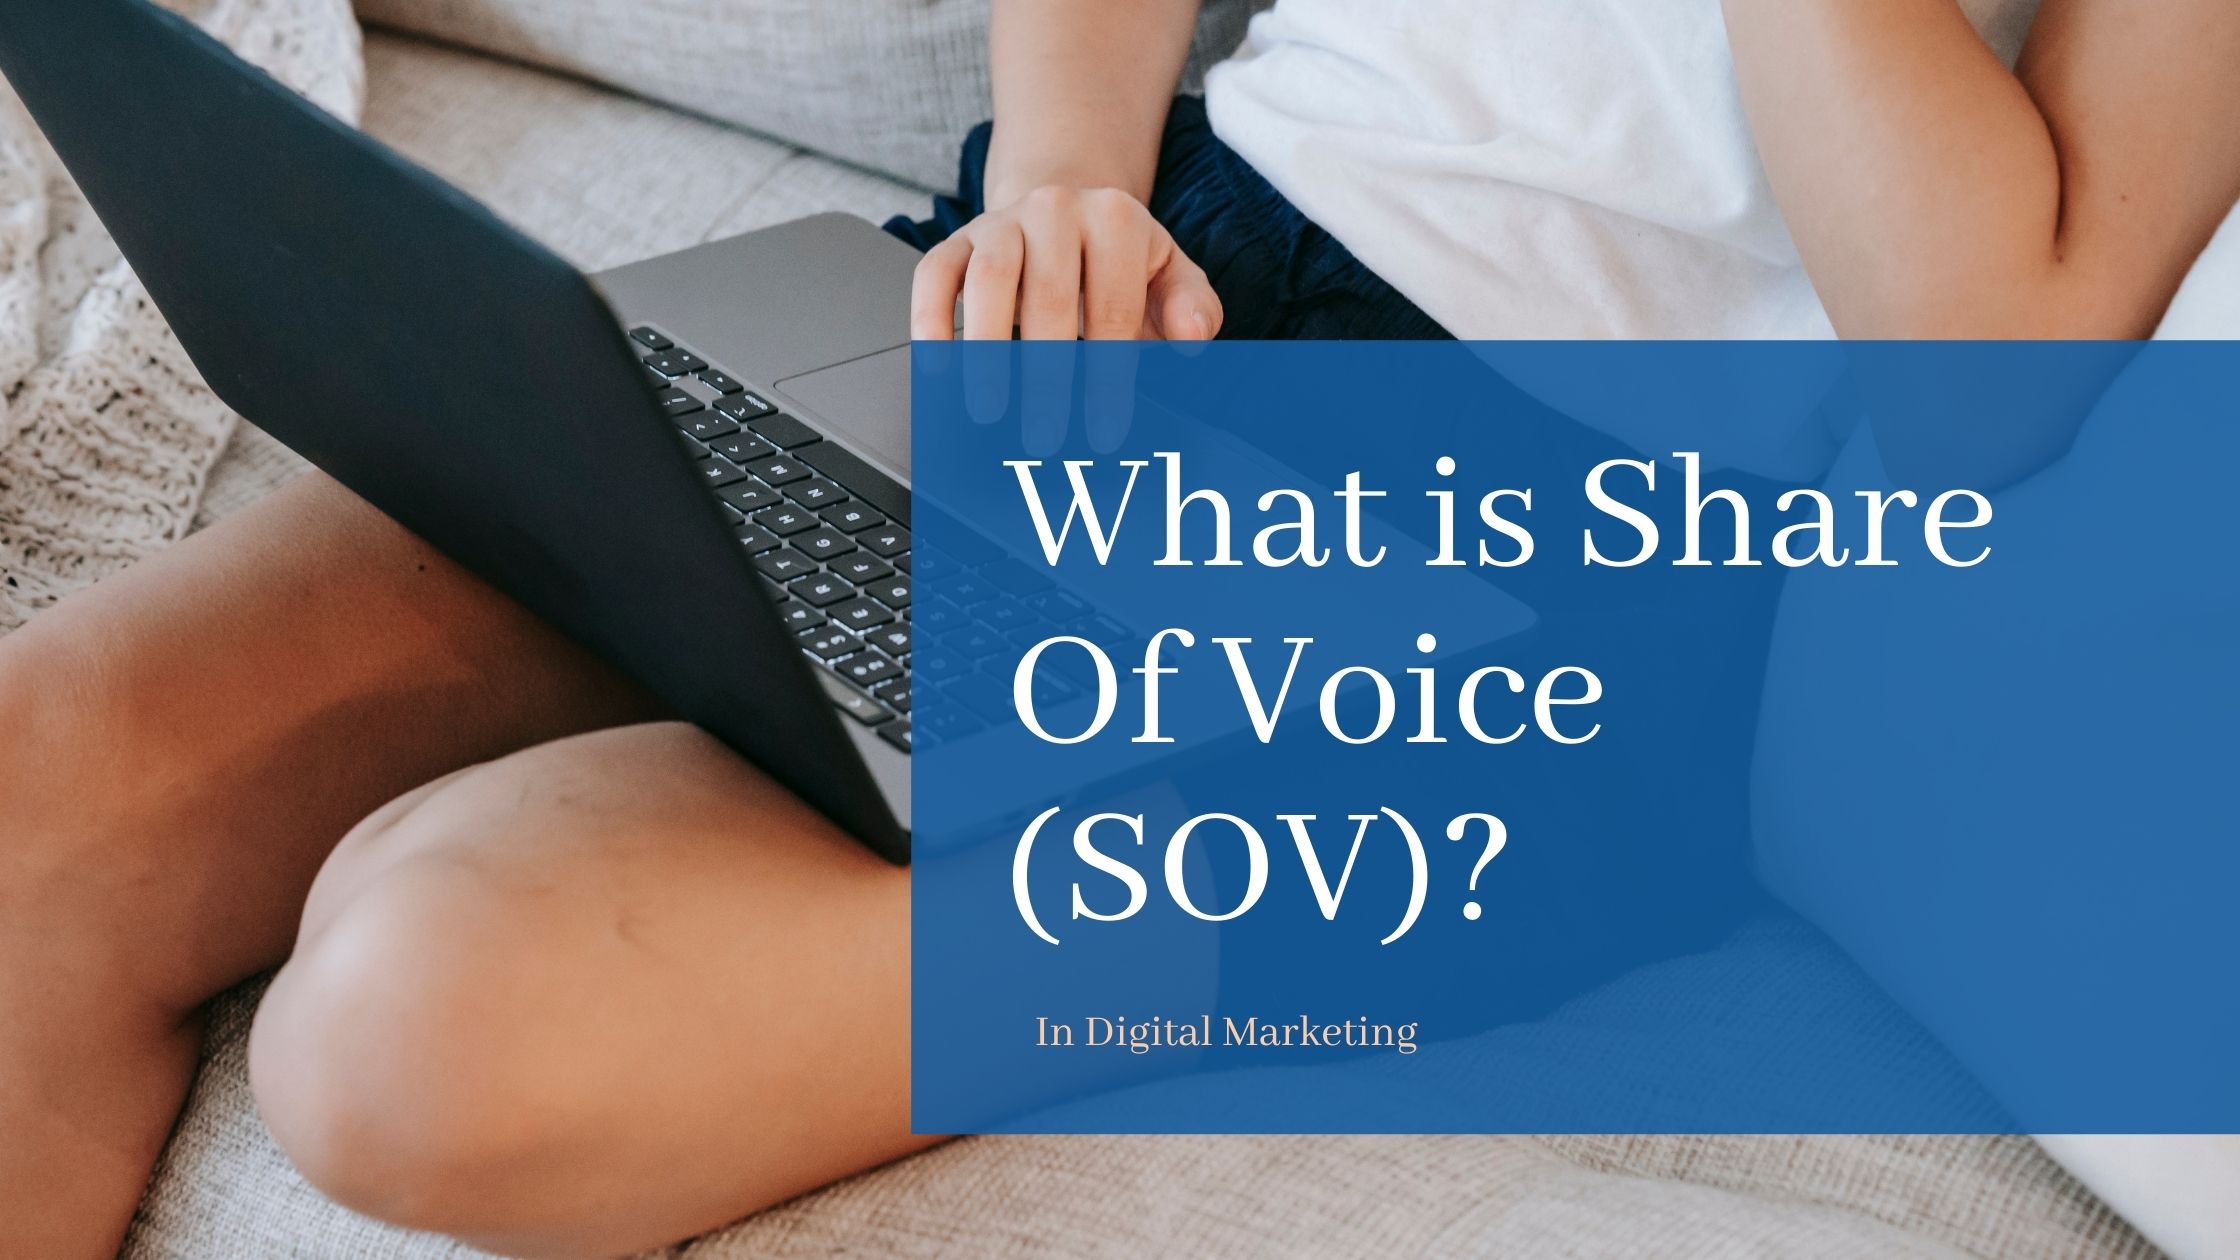 What is Share of Voice (SOV) in Digital Marketing